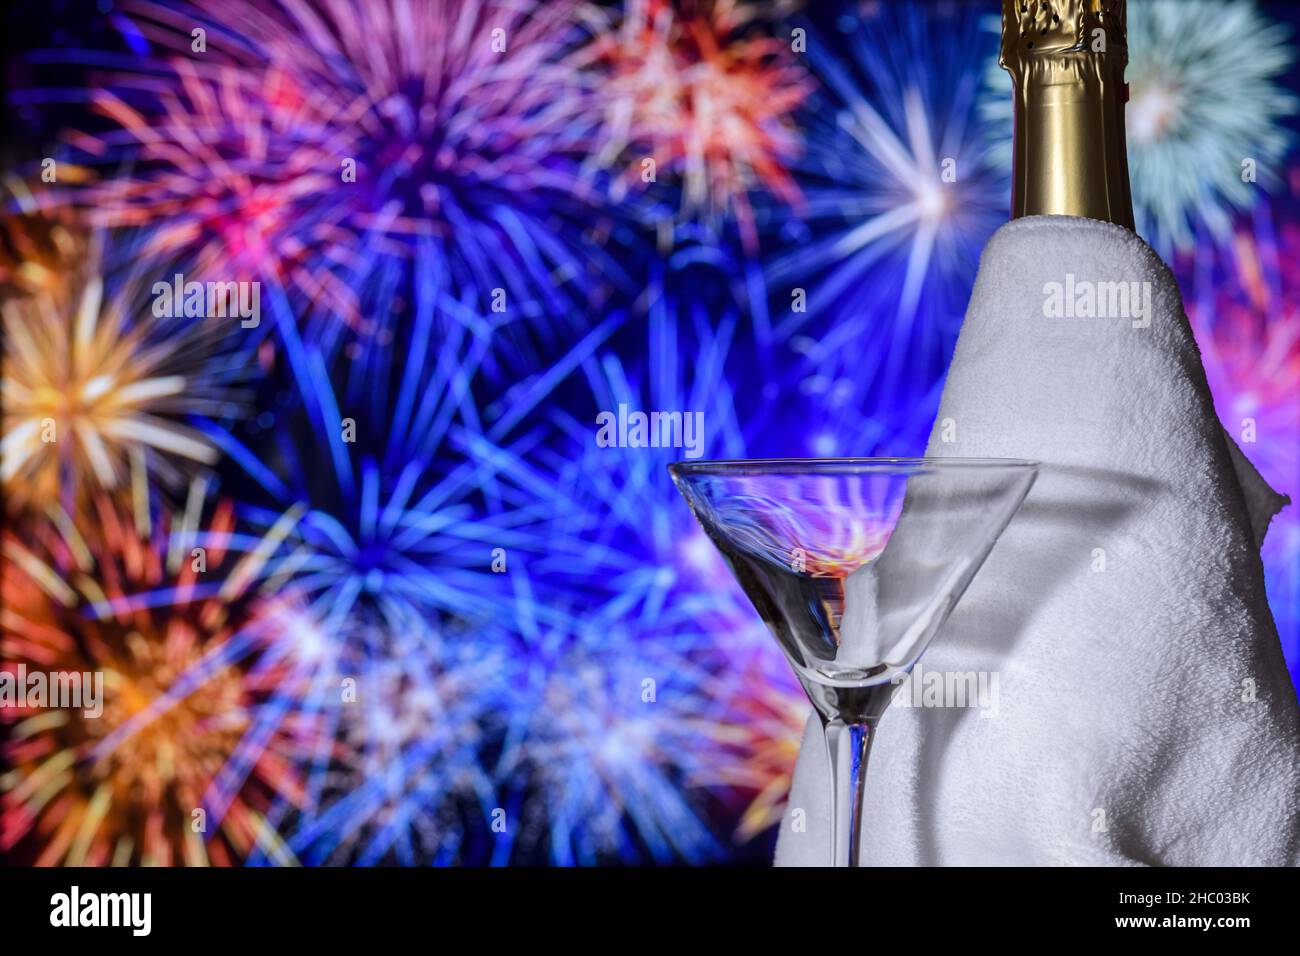 Festive glass with a bottle of champagne against the background of blurry fireworks lights during the celebration of the New Year. Stock Photo